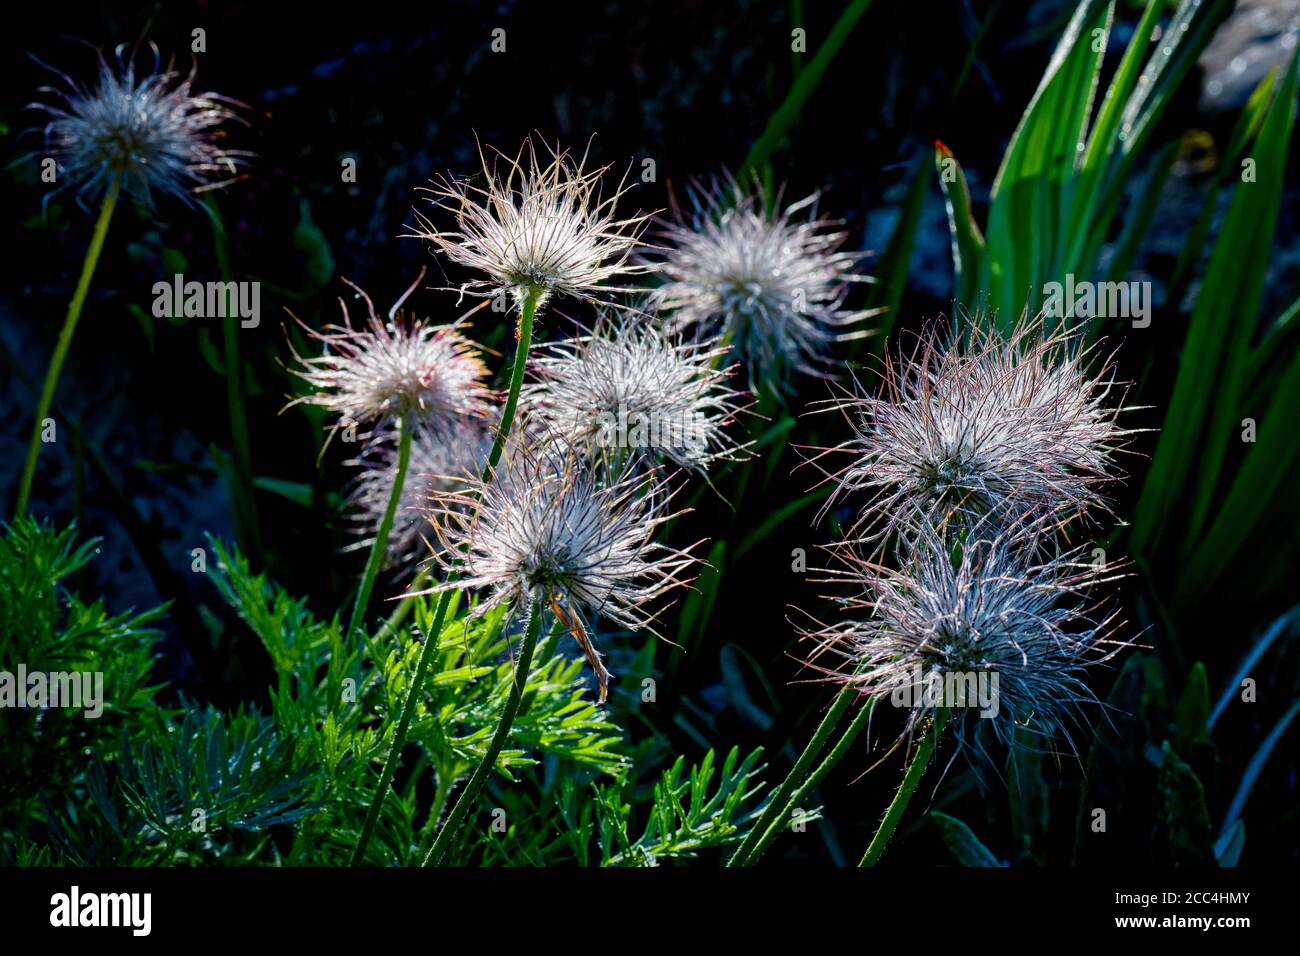 Pom Pom Heads High Resolution Stock Photography and Images - Alamy